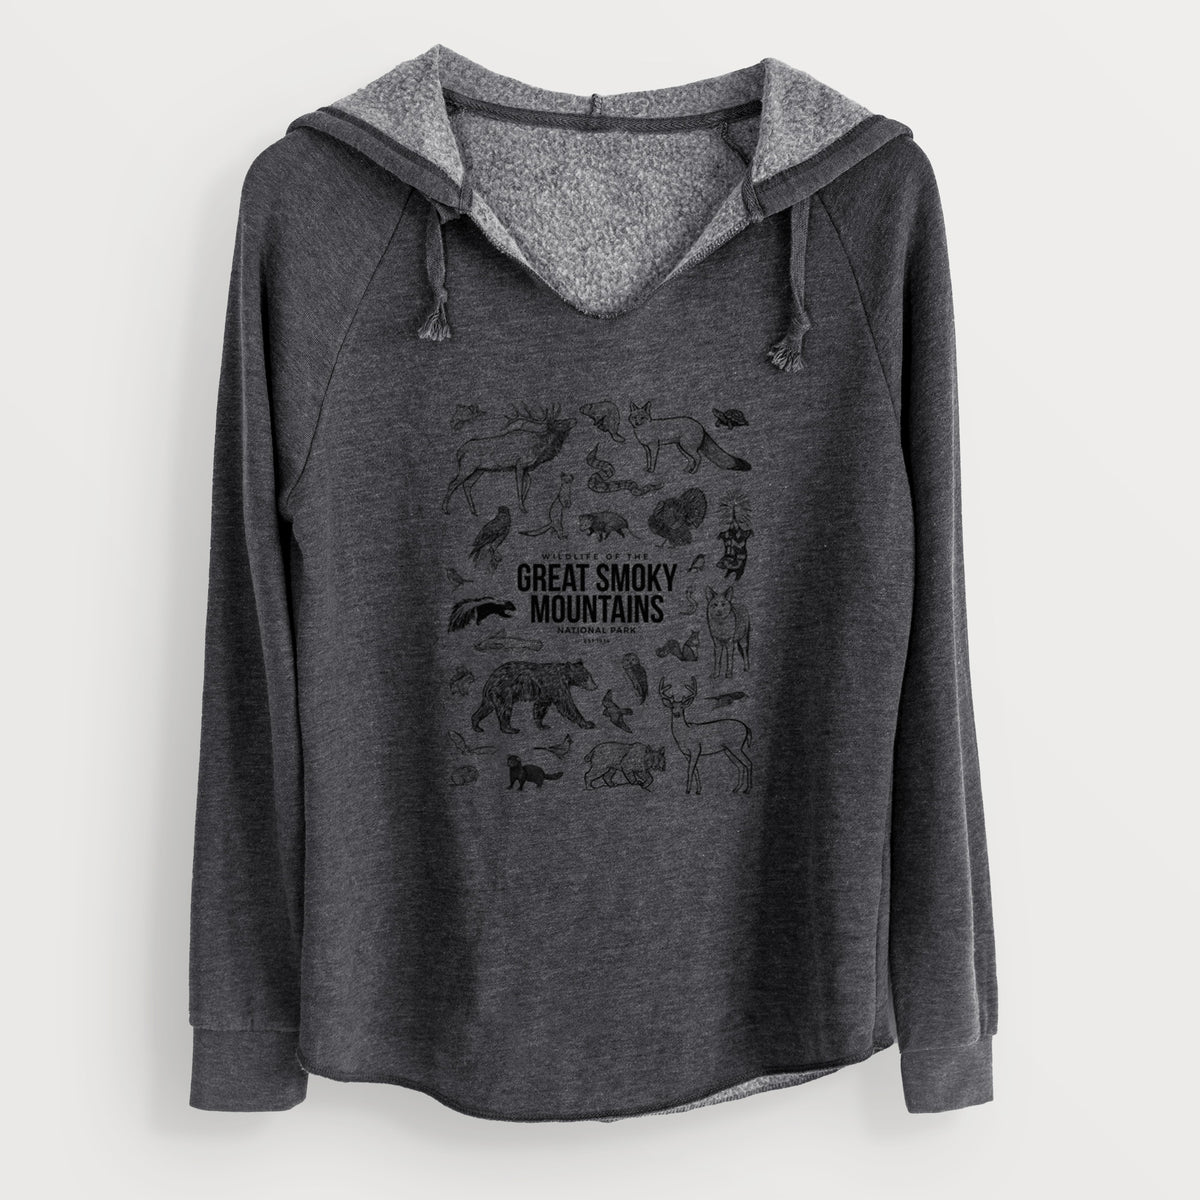 Wildlife of the Great Smoky Mountains National Park - Cali Wave Hooded Sweatshirt